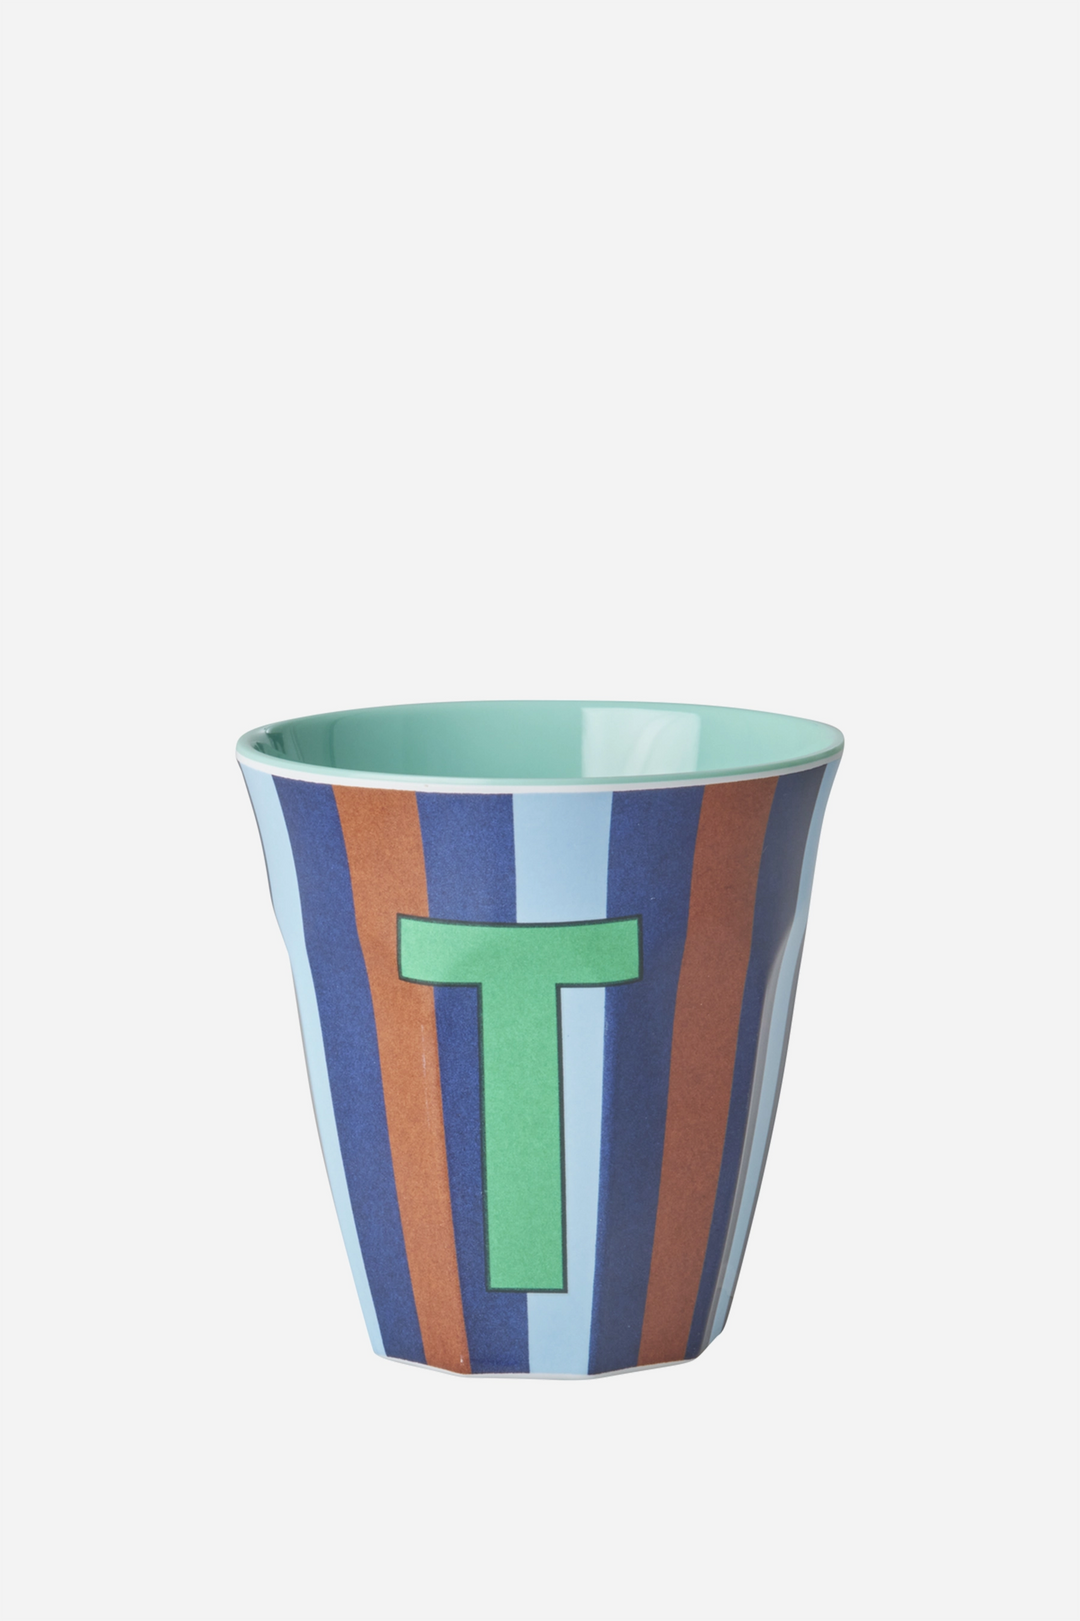 Striped Melamine Cup / Letter T